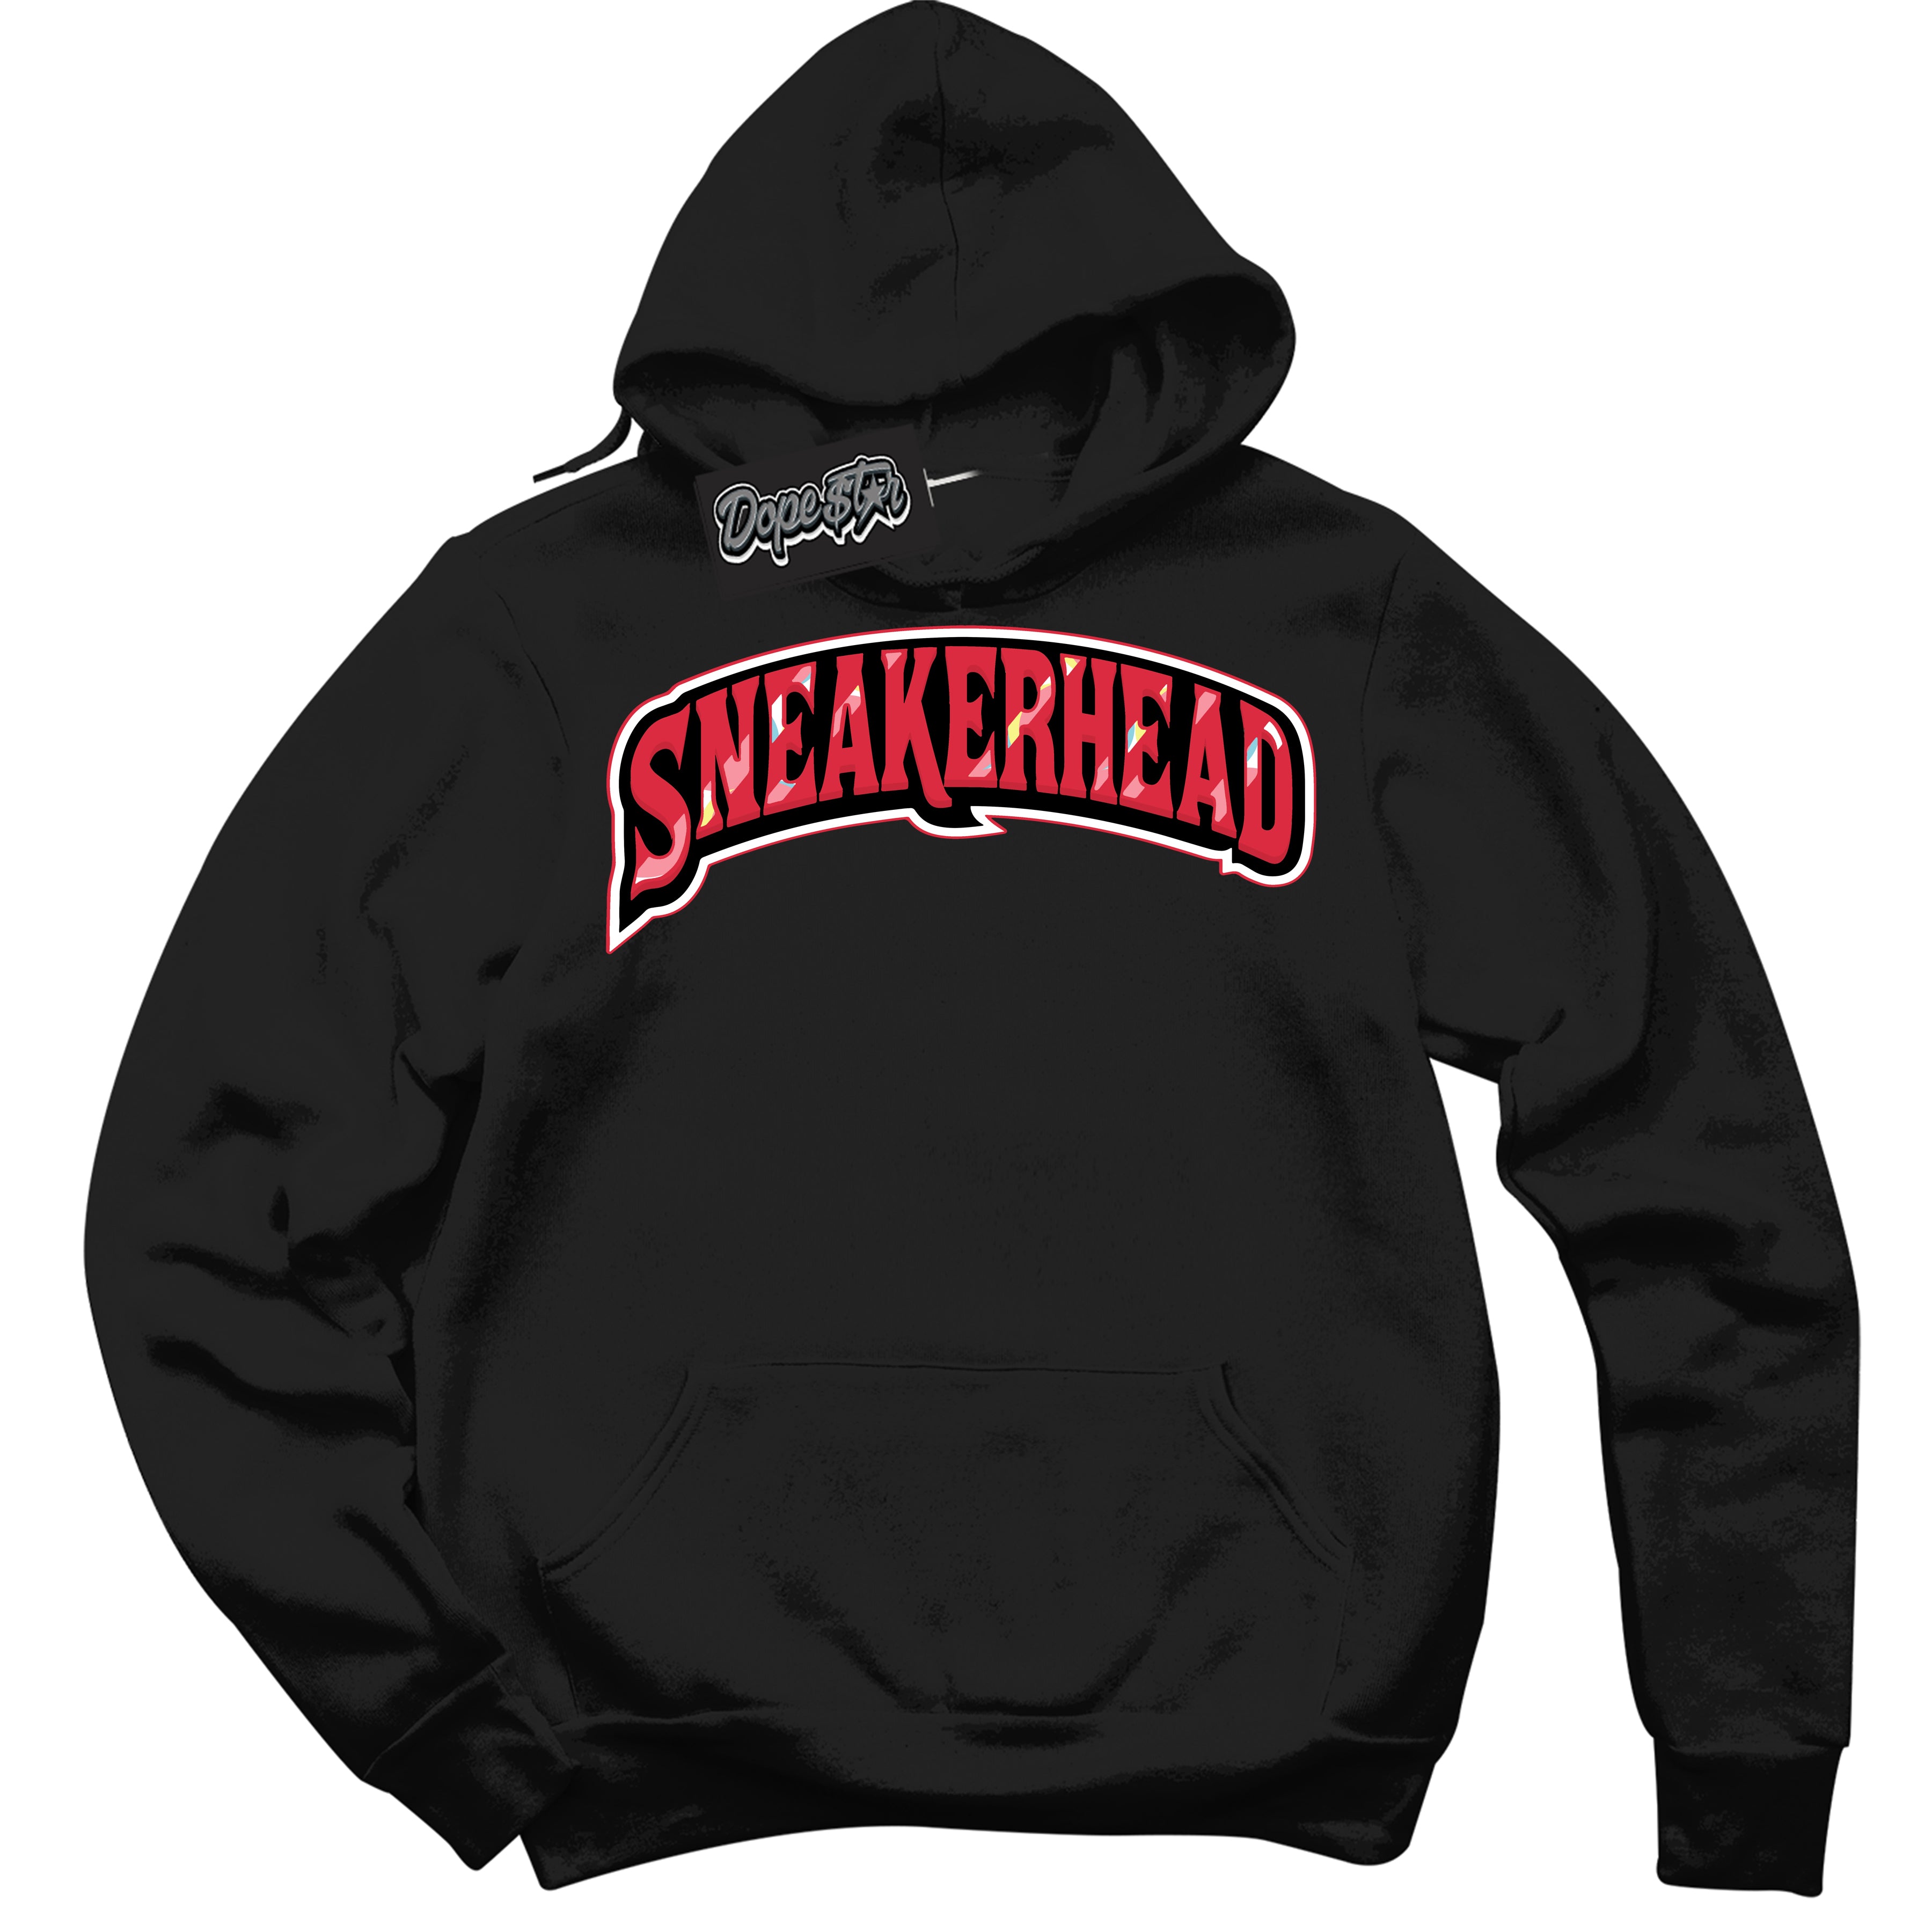 Cool Black Graphic DopeStar Hoodie with “ Sneakerhead “ print, that perfectly matches Spider-Verse 1s sneakers